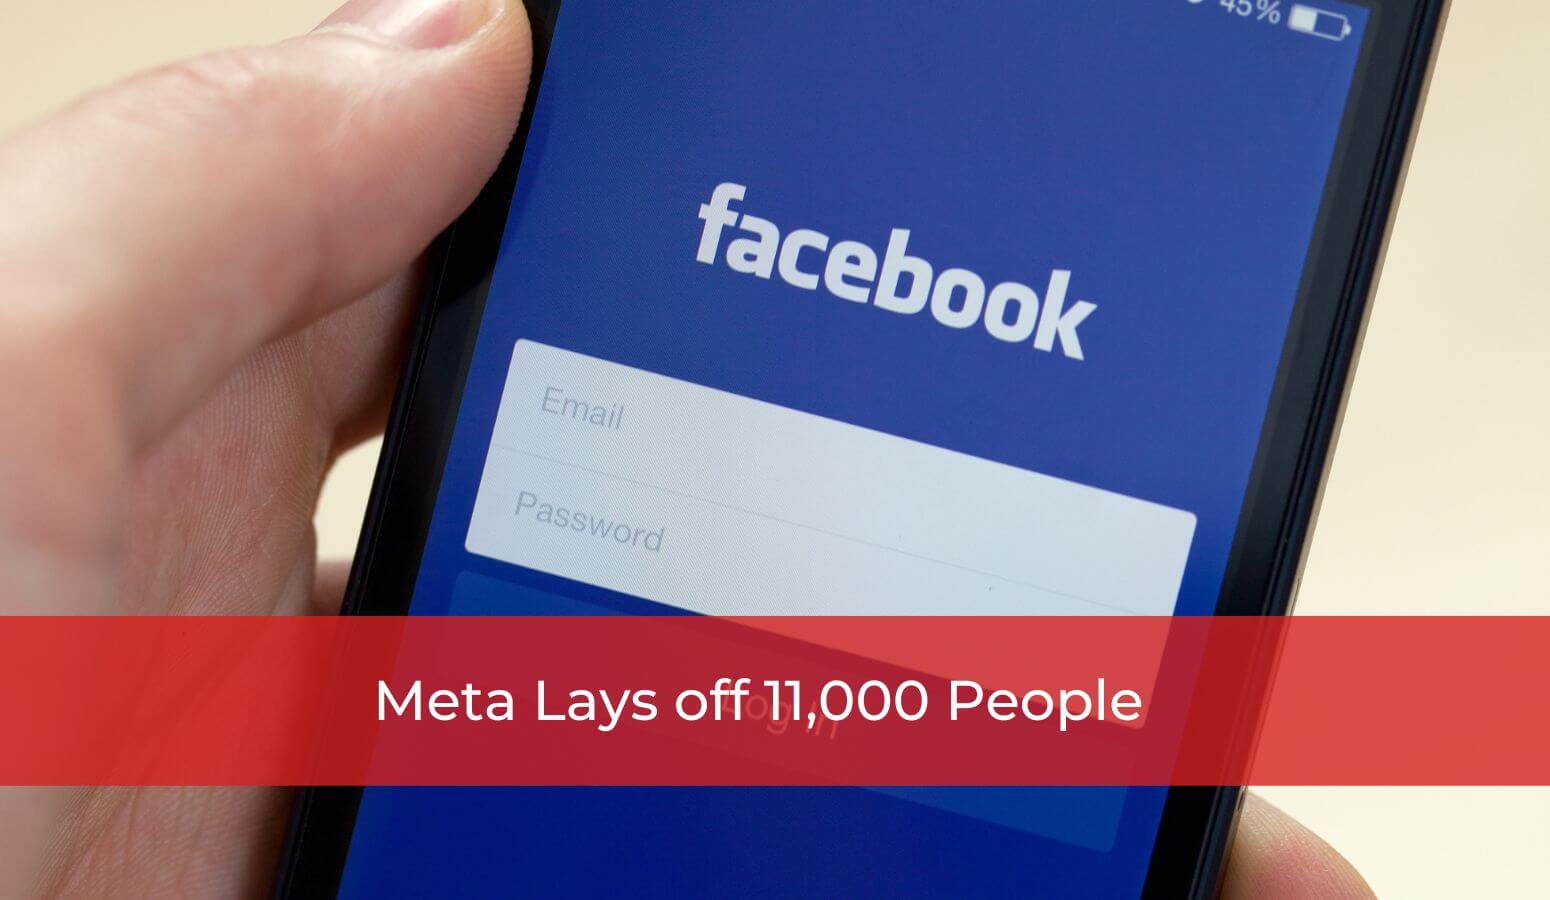 Featured image for “Meta Lays off 11,000 People”